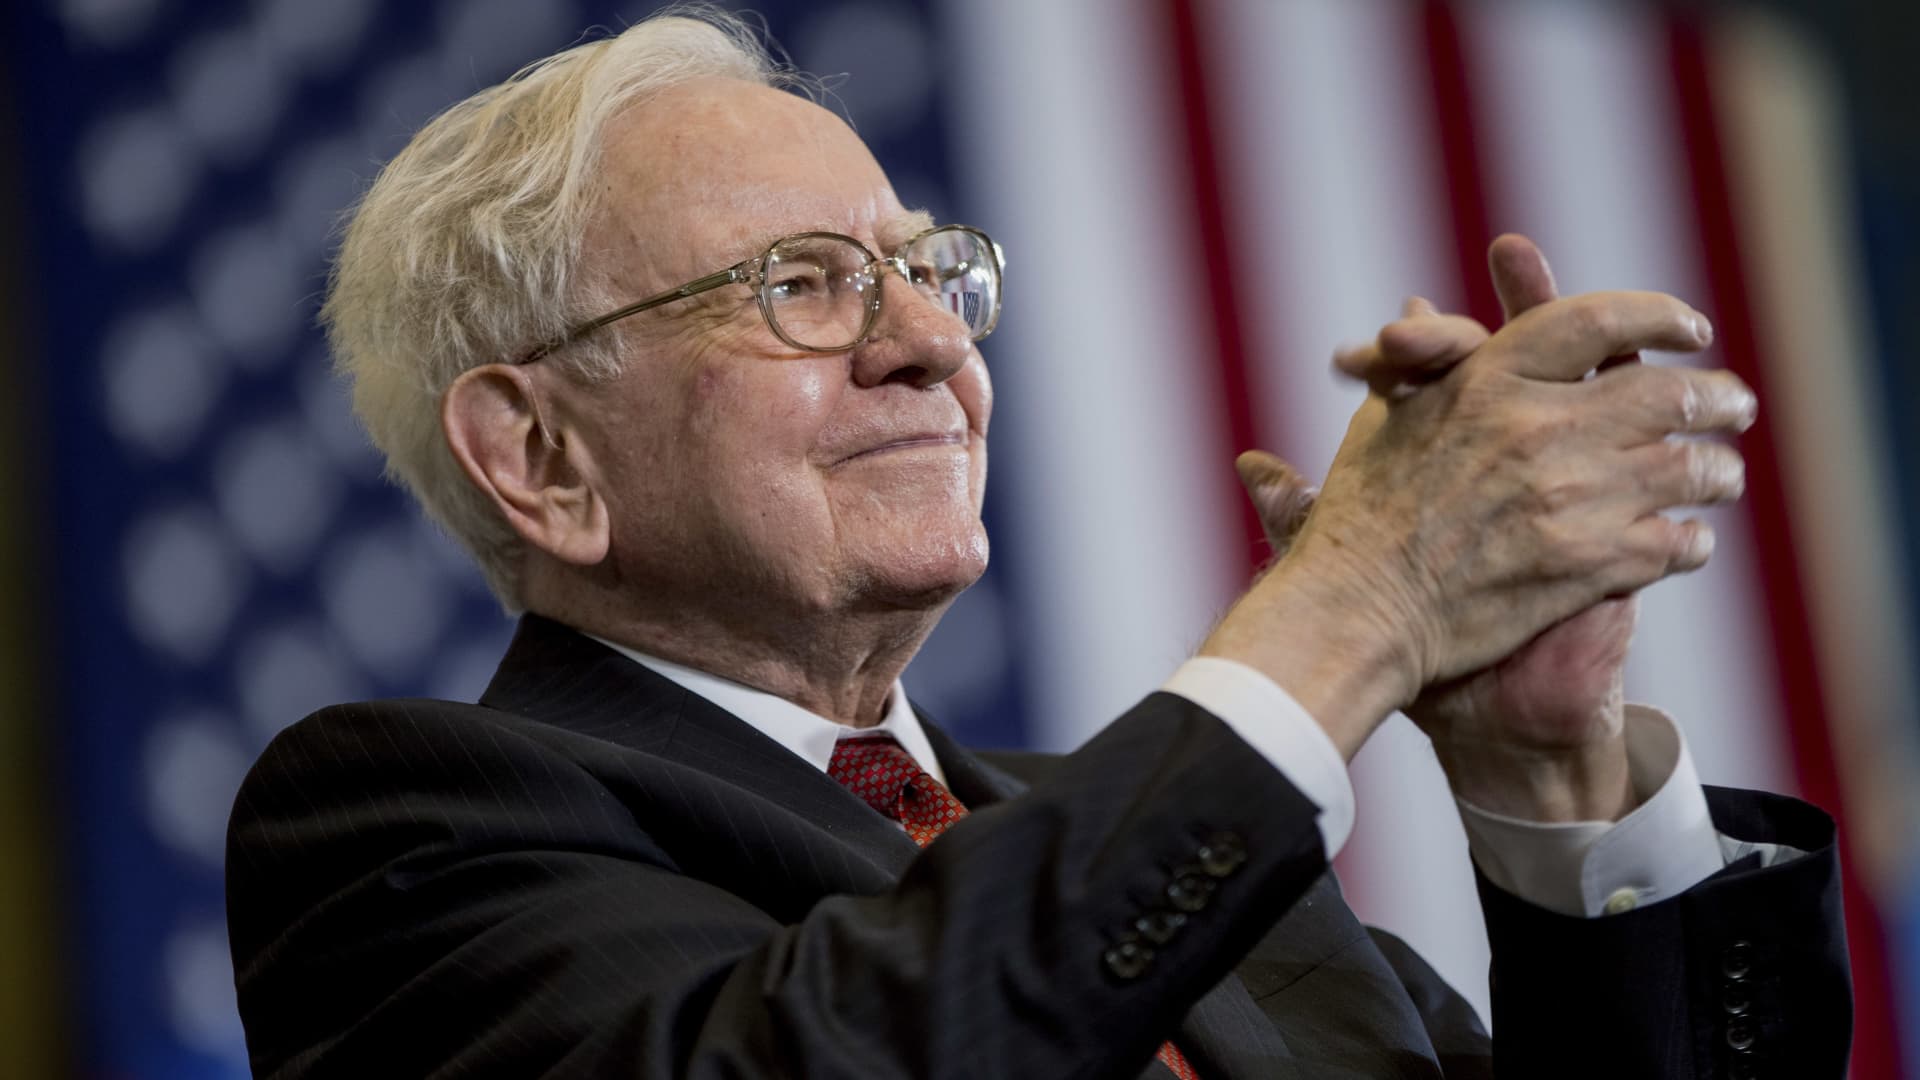 Berkshire Hathaway’s operating earnings jump 20% conglomerate buys back another $1 billion in stock – CNBC